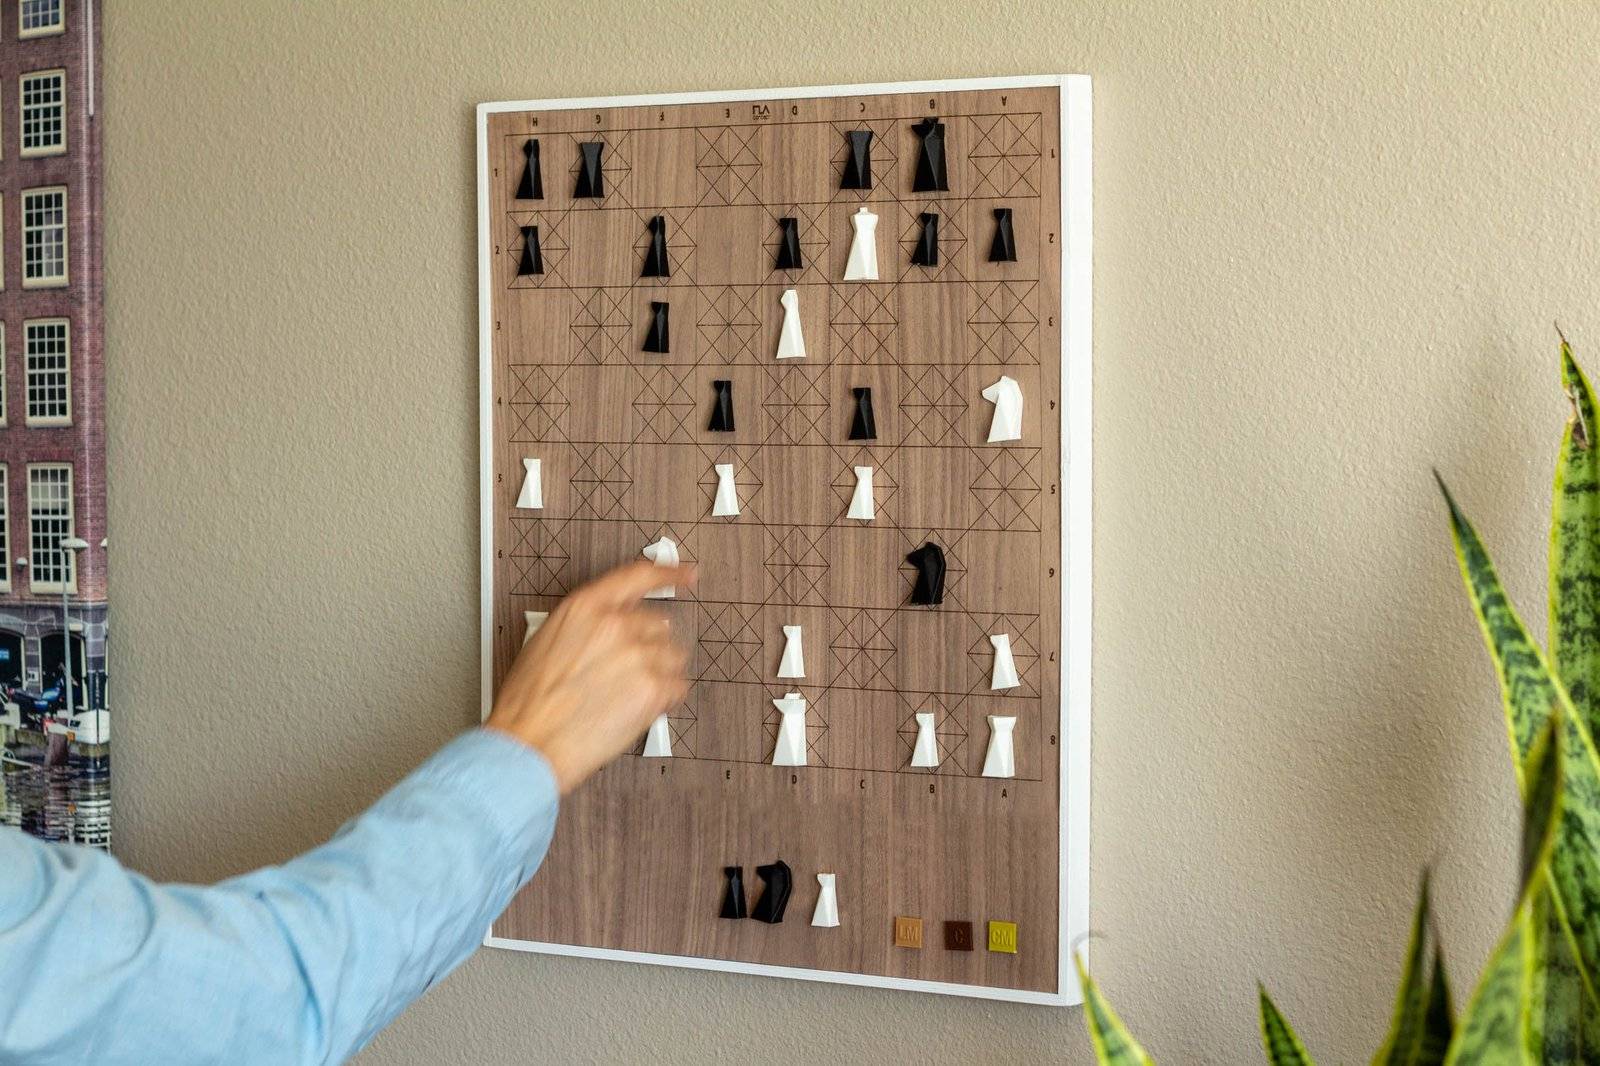 Vertical Chess Set, Handmade Modern Geometric Chess Set with Magnetized Chess Pieces, Custom Gift